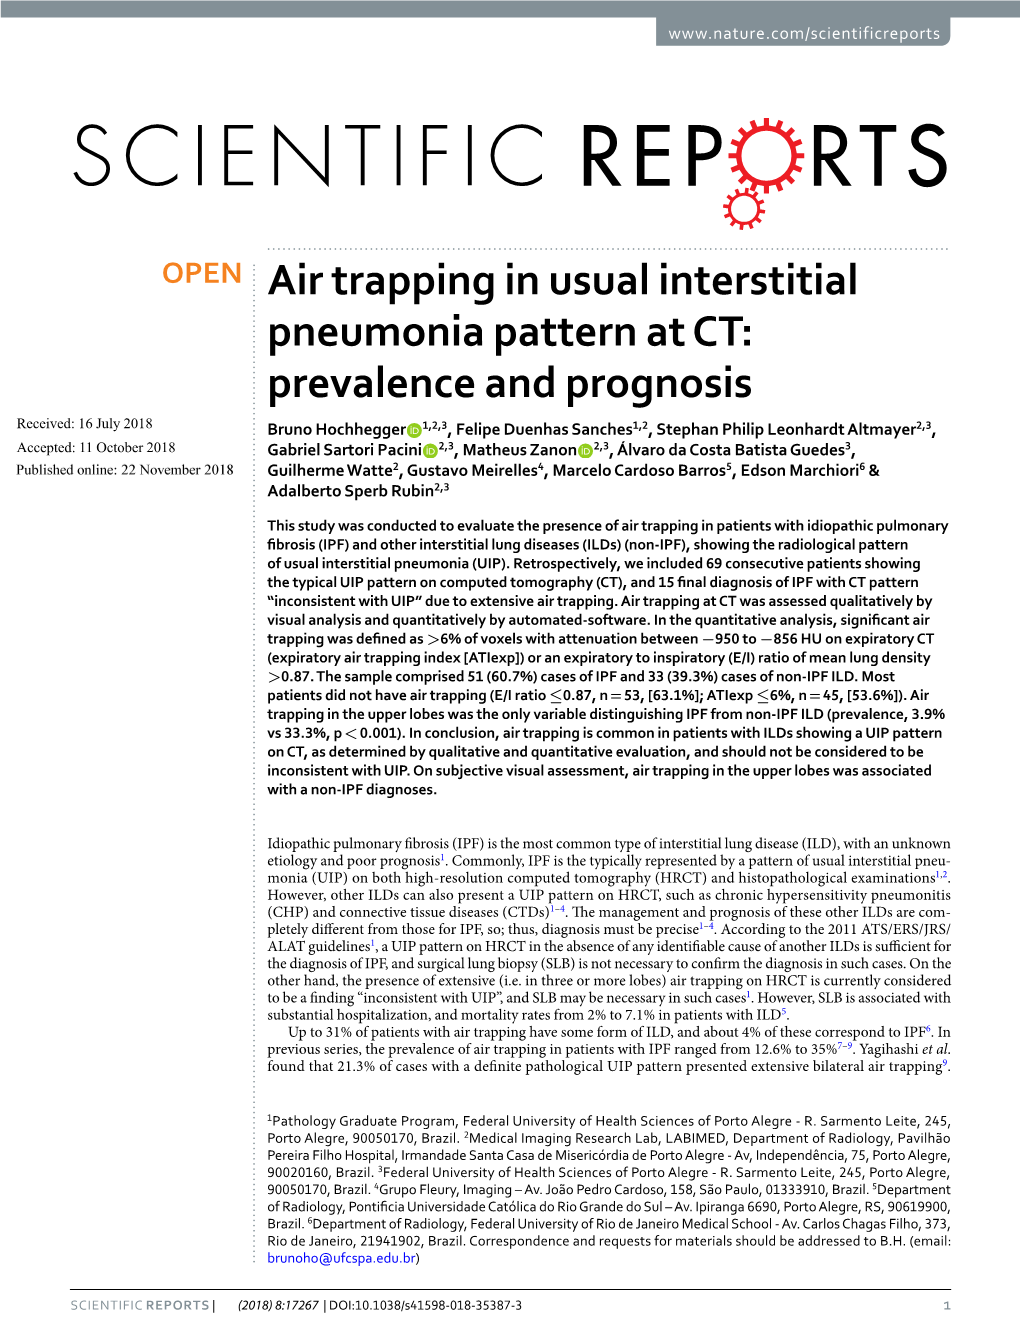 Air Trapping in Usual Interstitial Pneumonia Pattern at CT